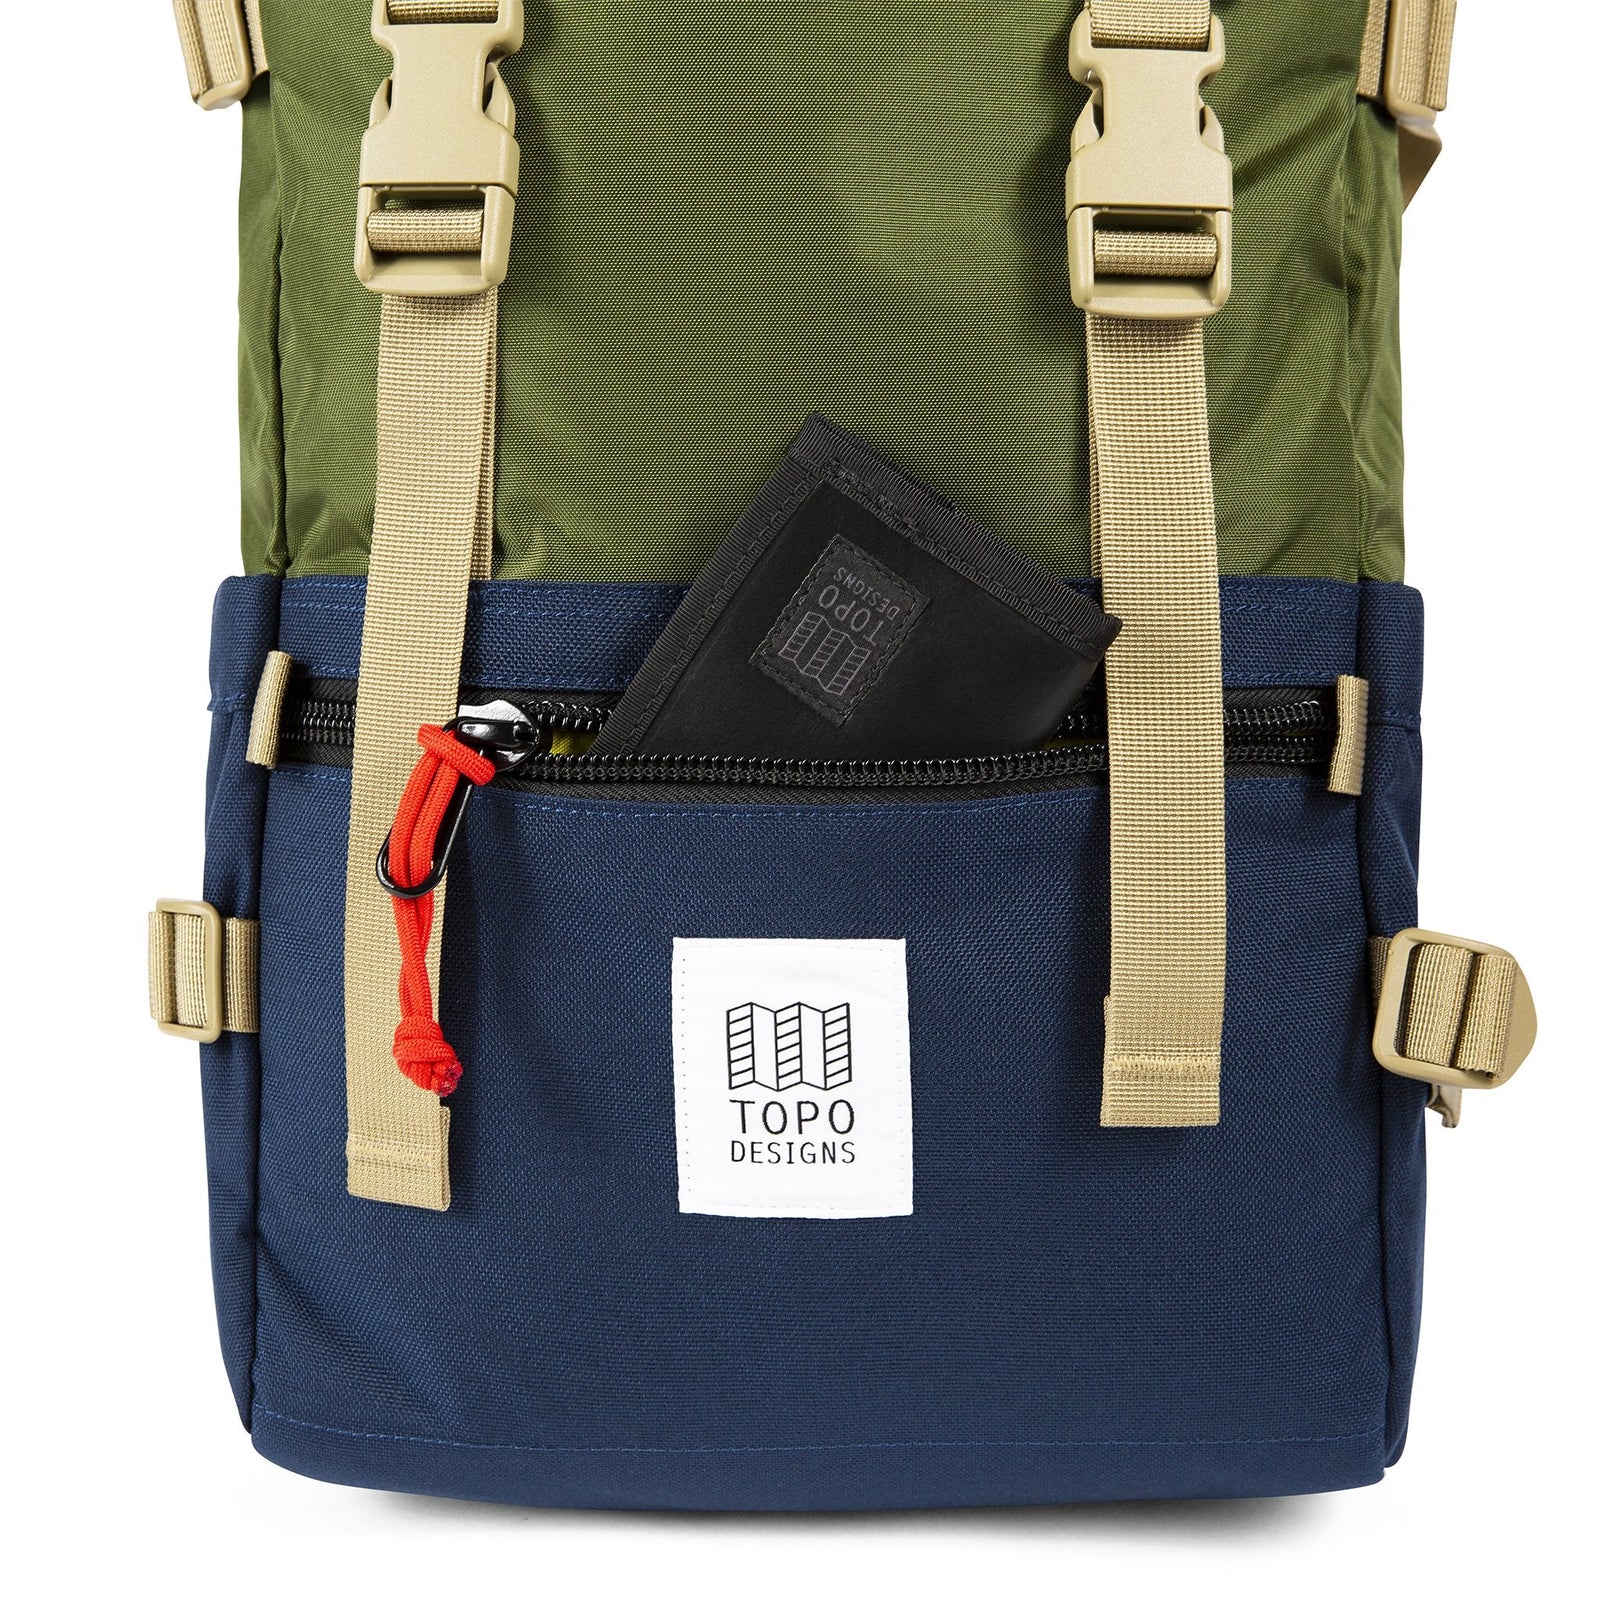 General front detail shot of the Topo Designs Rover Pack Classic in Olive/Navy showing front zipper pocket.